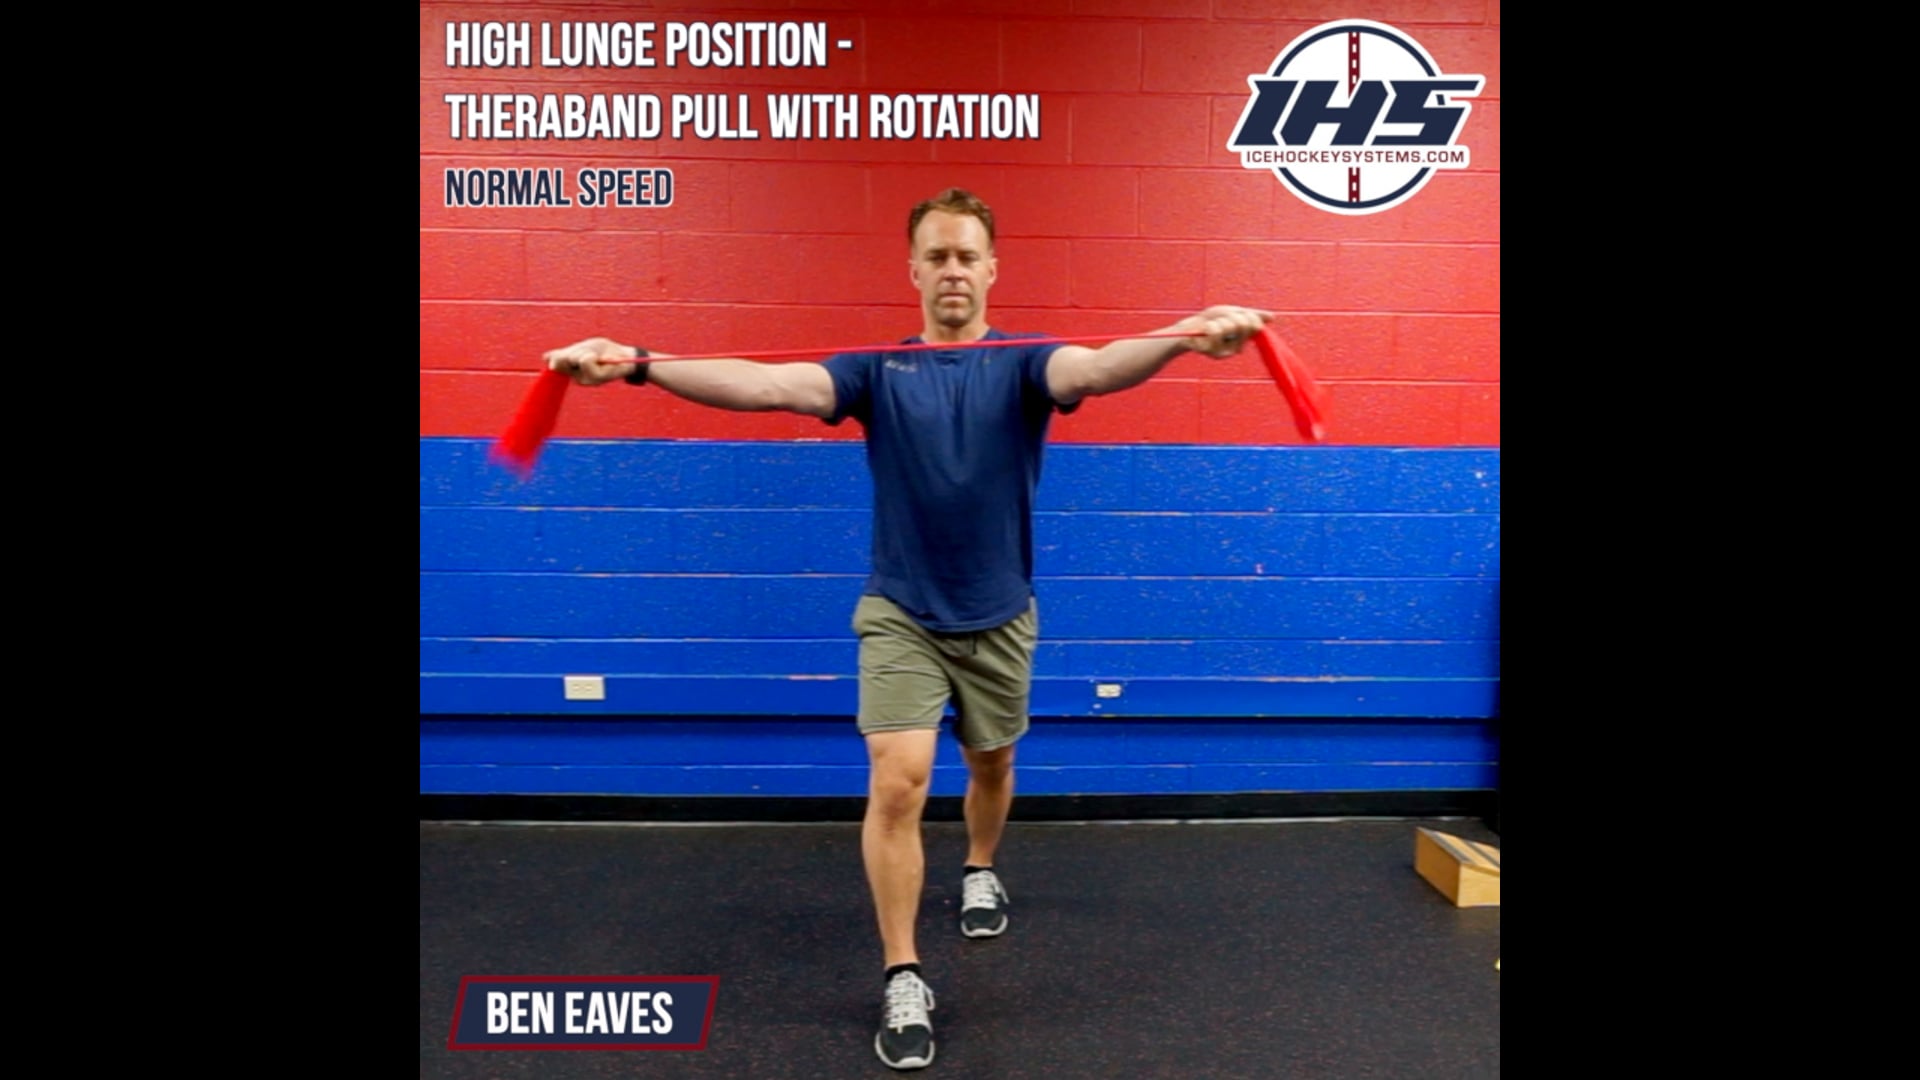 High Lunge Position - Theraband Pull With Rotation